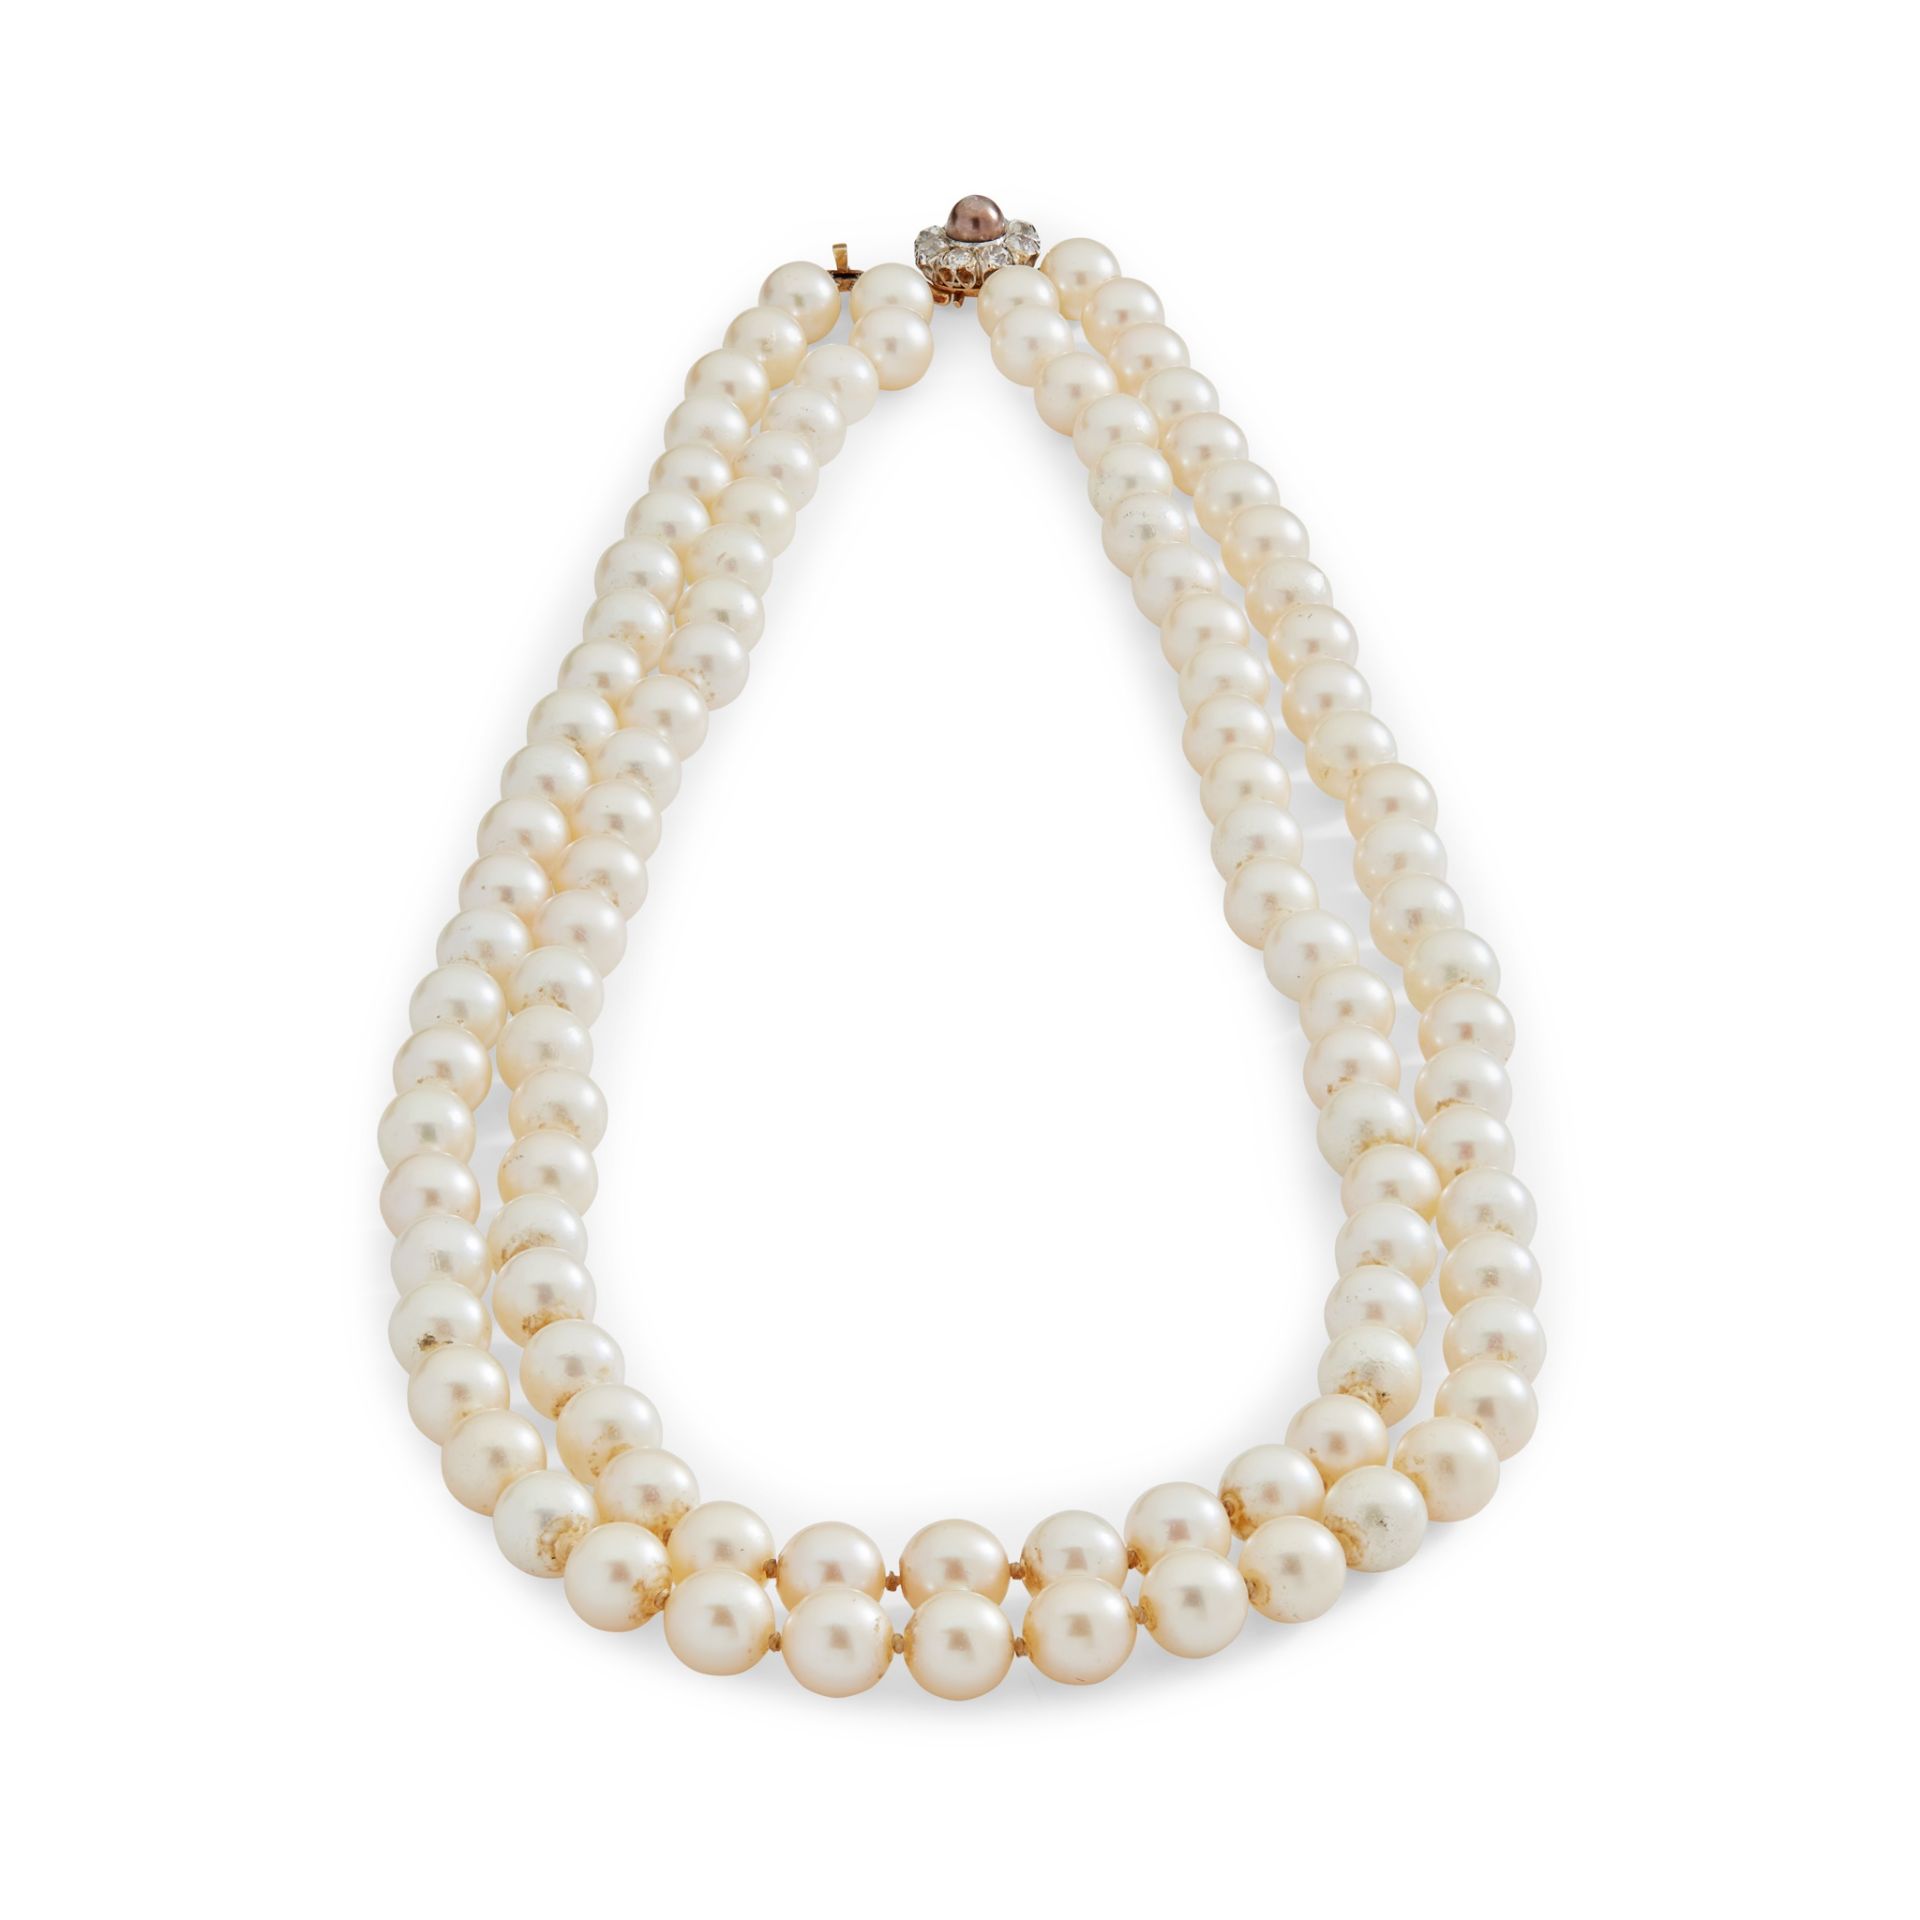 A two-strand pearl necklace